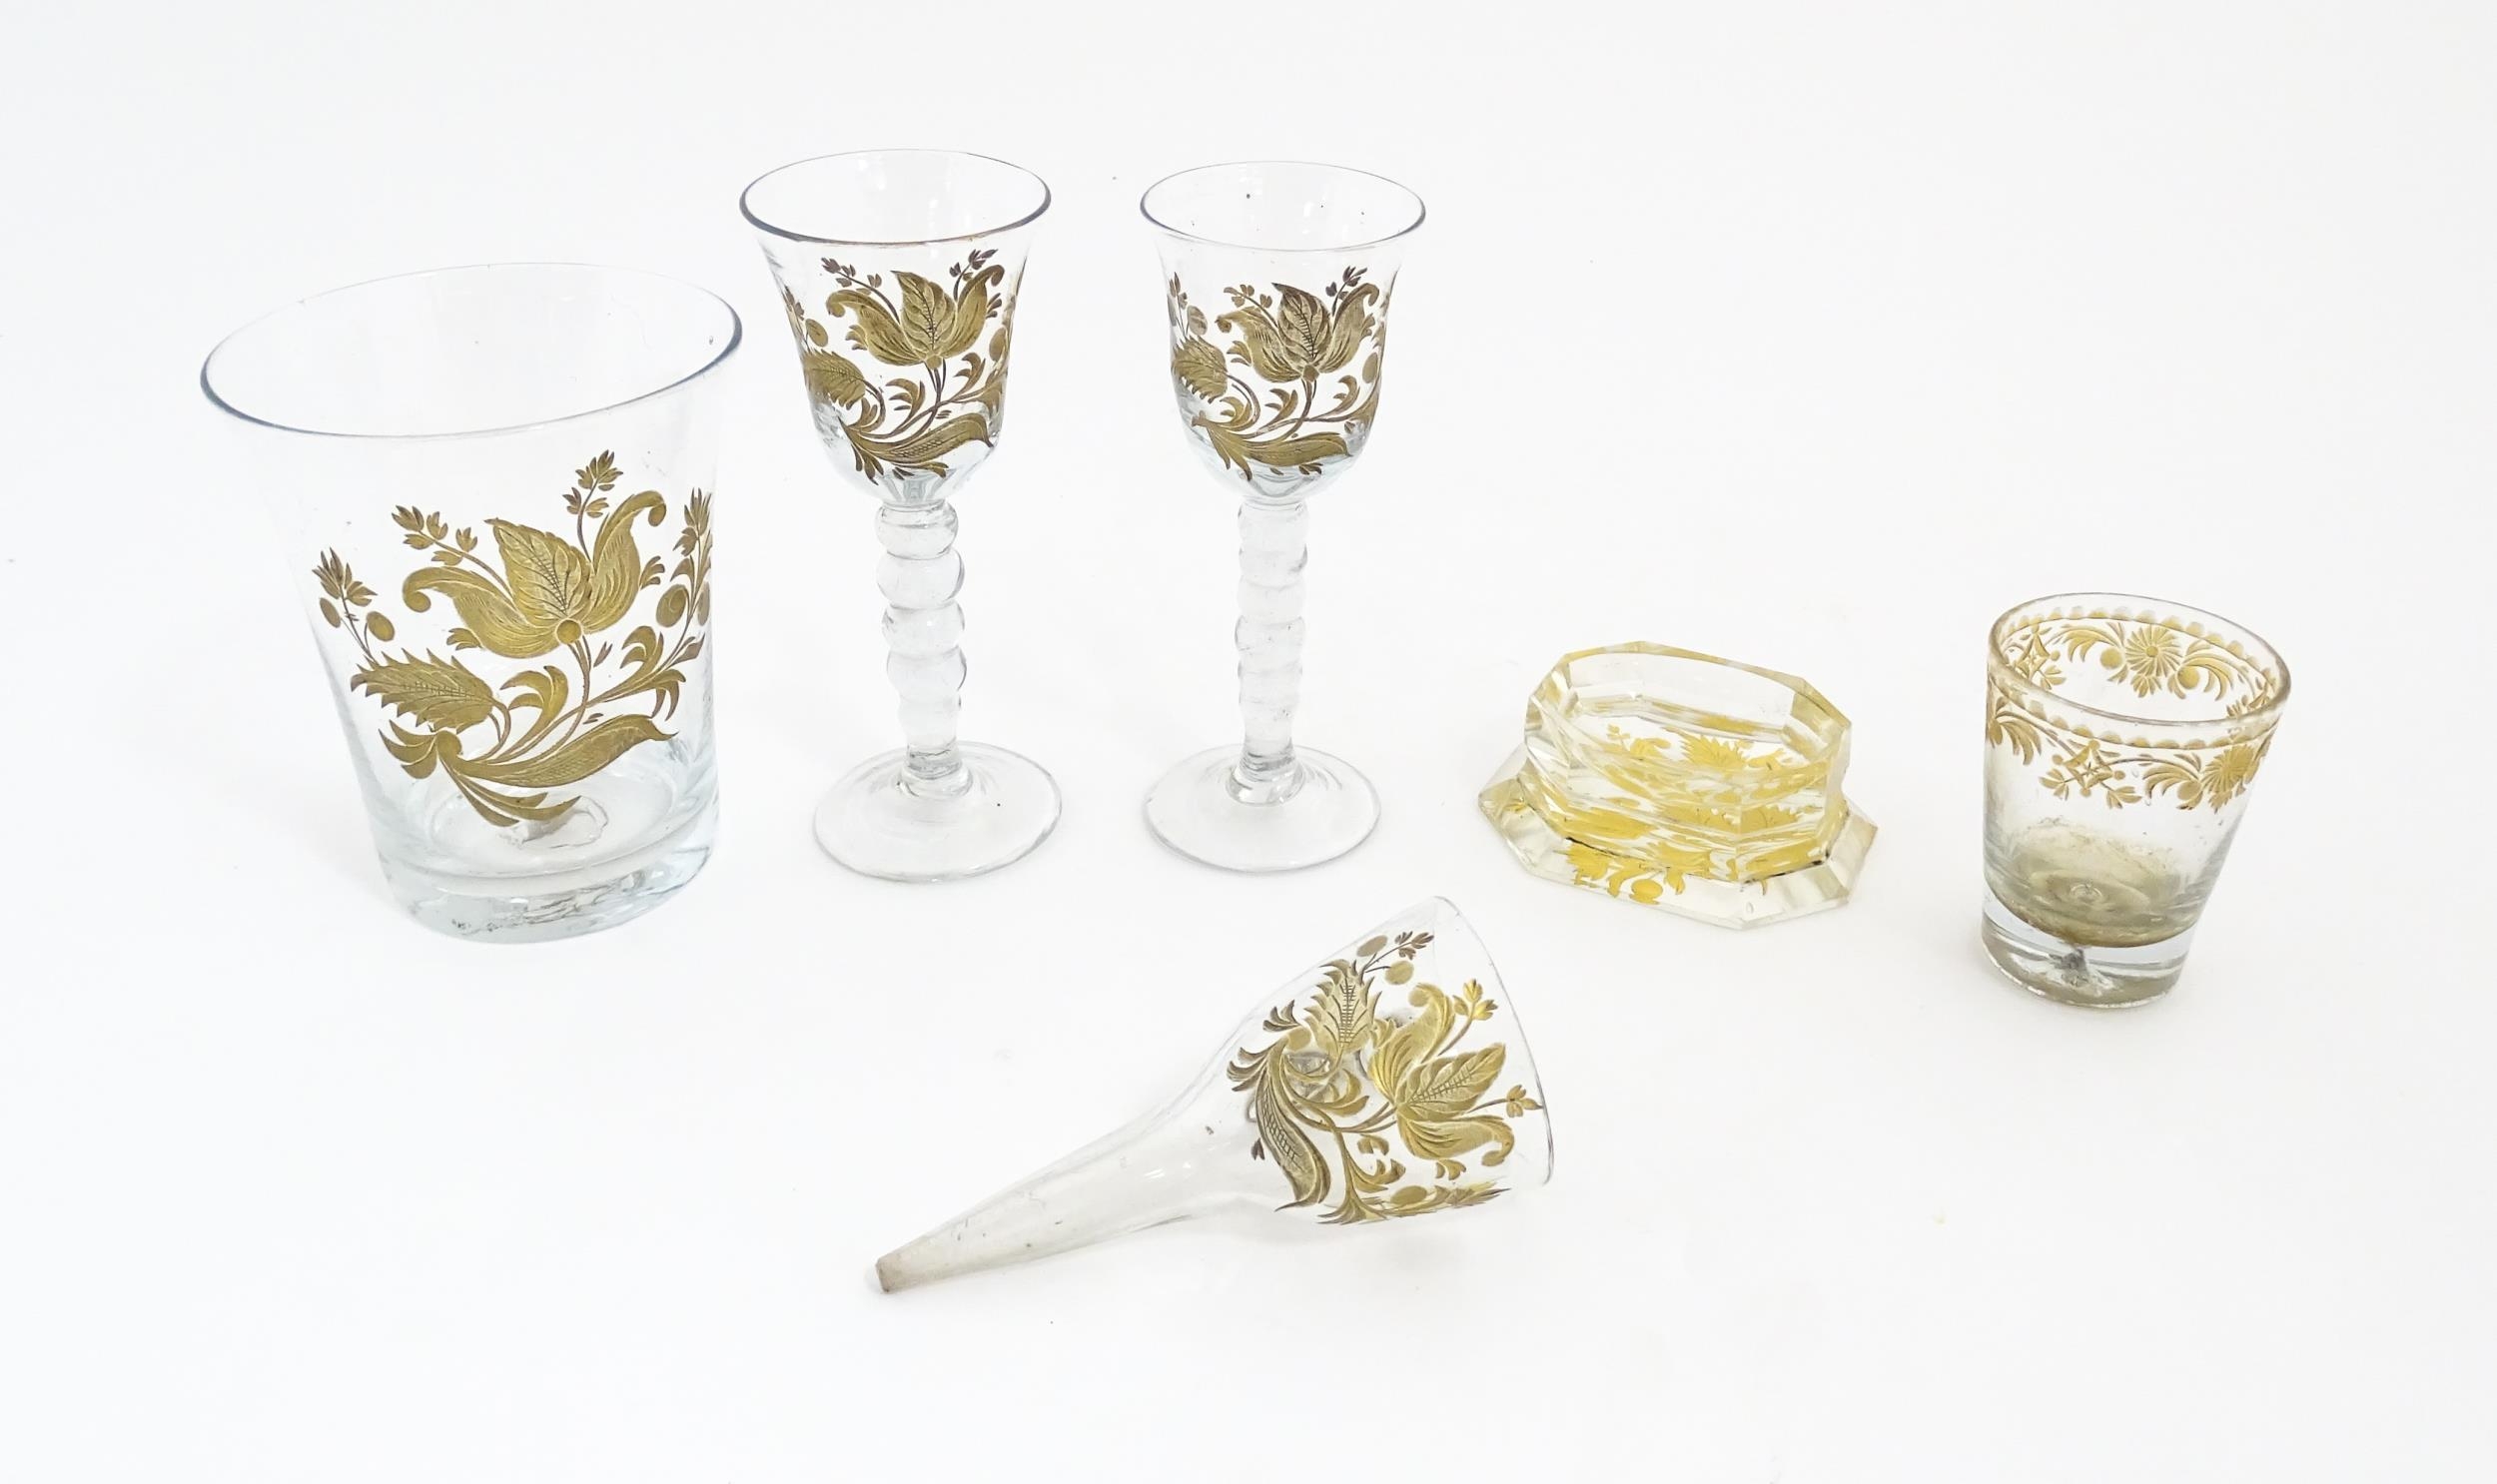 18thC glass to include 18thC wine glasses, beakers, funnel, etc. with engraved gilt foliate and - Image 7 of 11